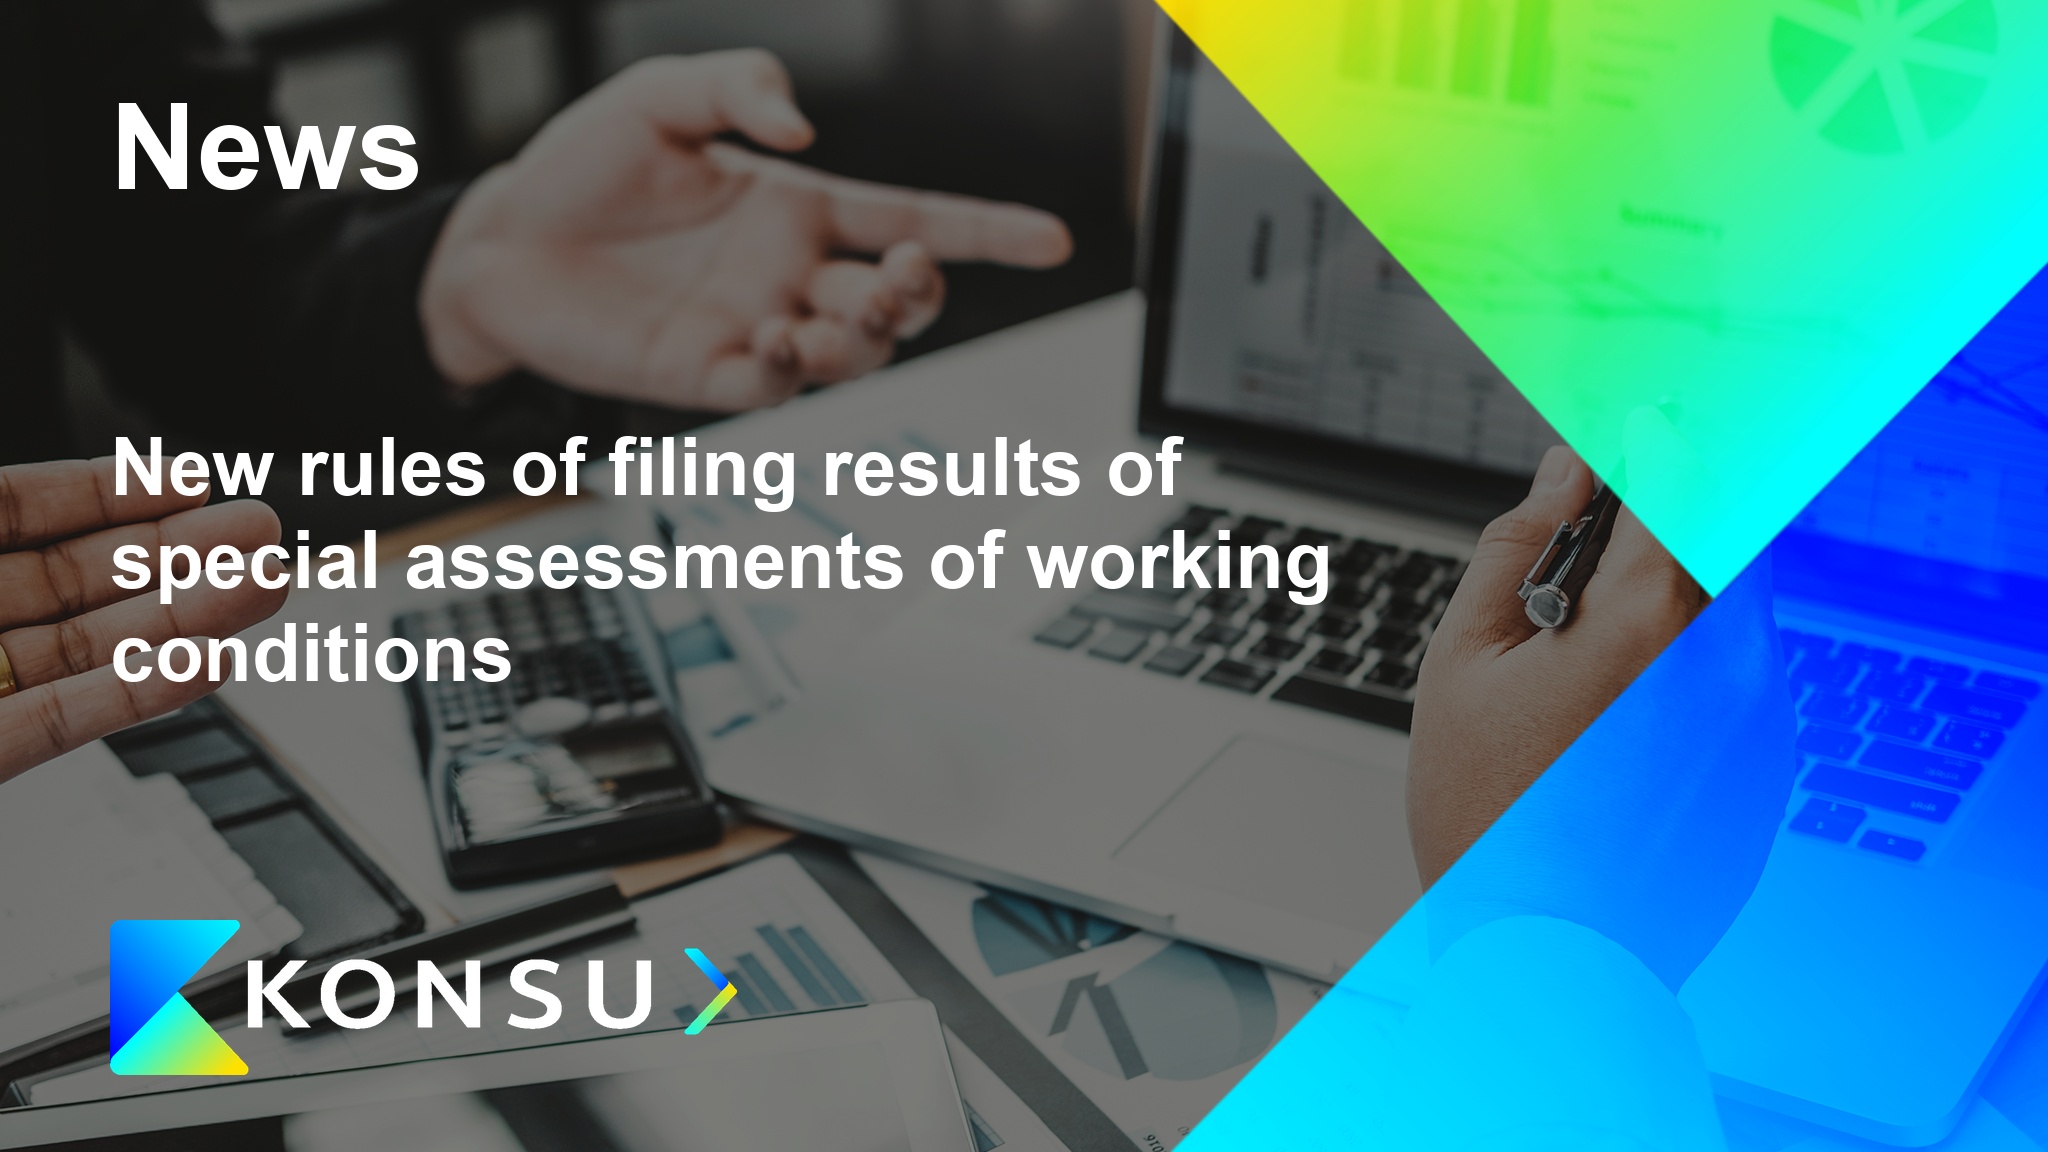 New rules filing results special assessments working en konsu ou